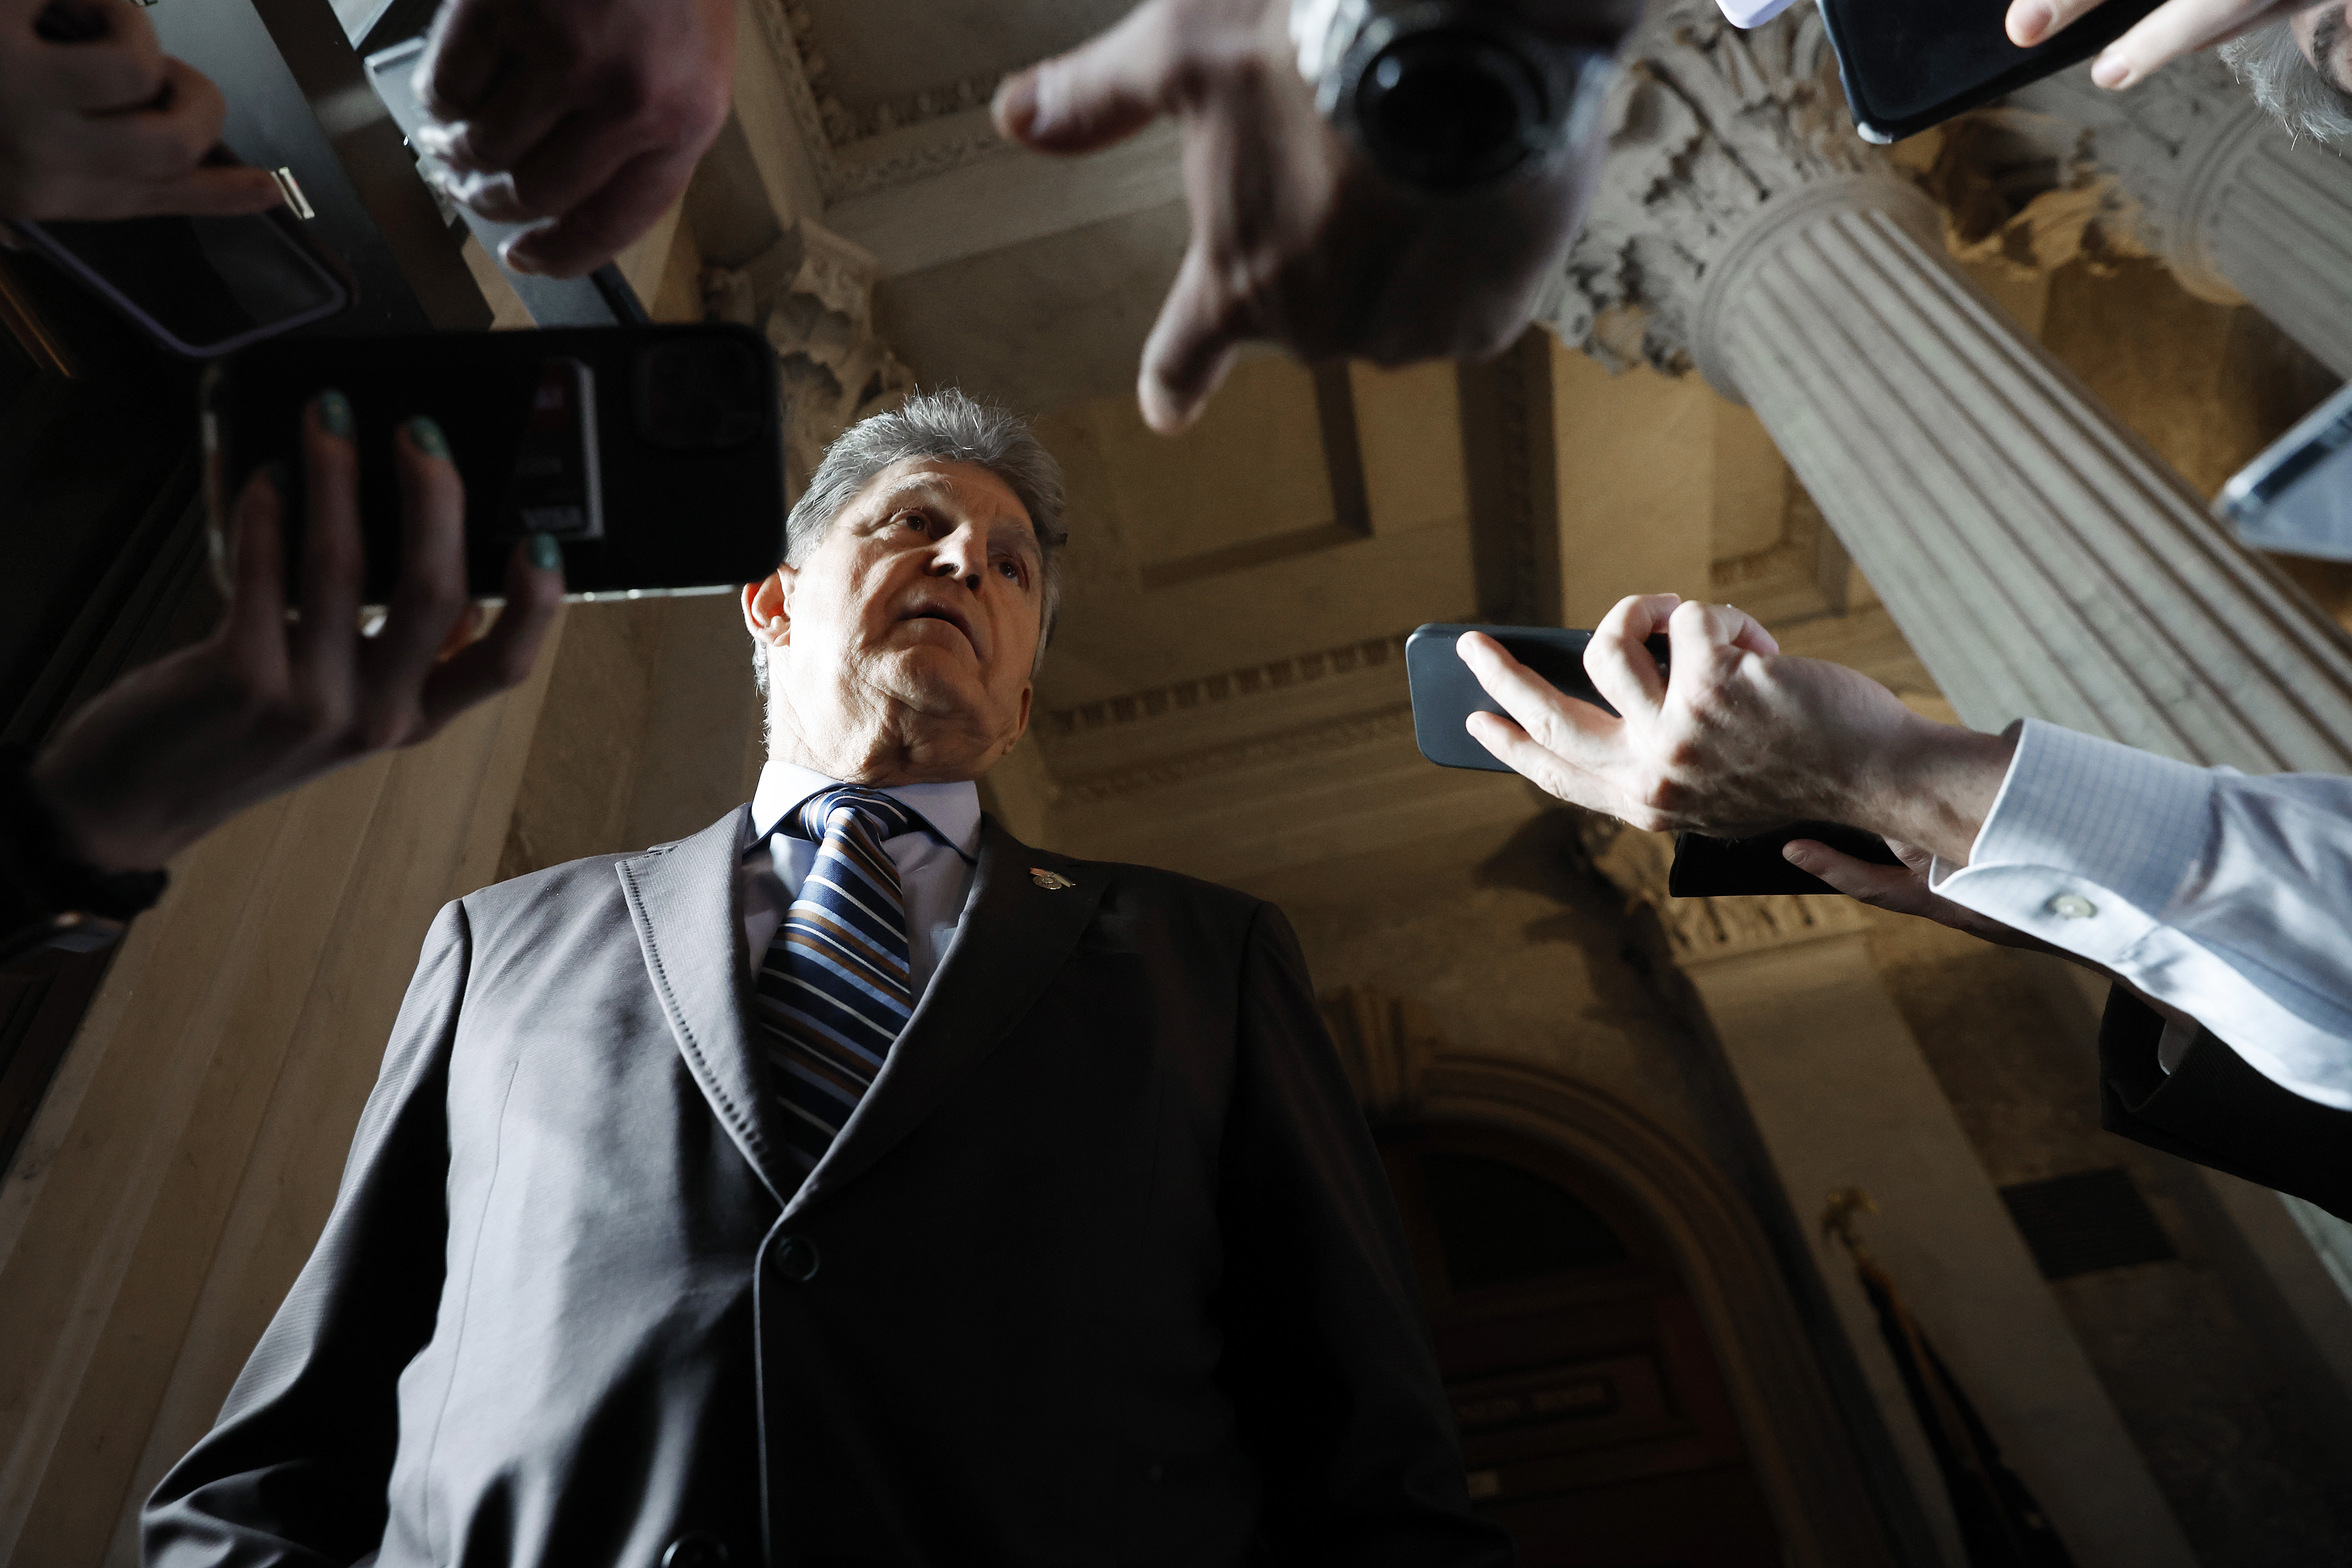 Reporters hold phones up to Manchin to record him.